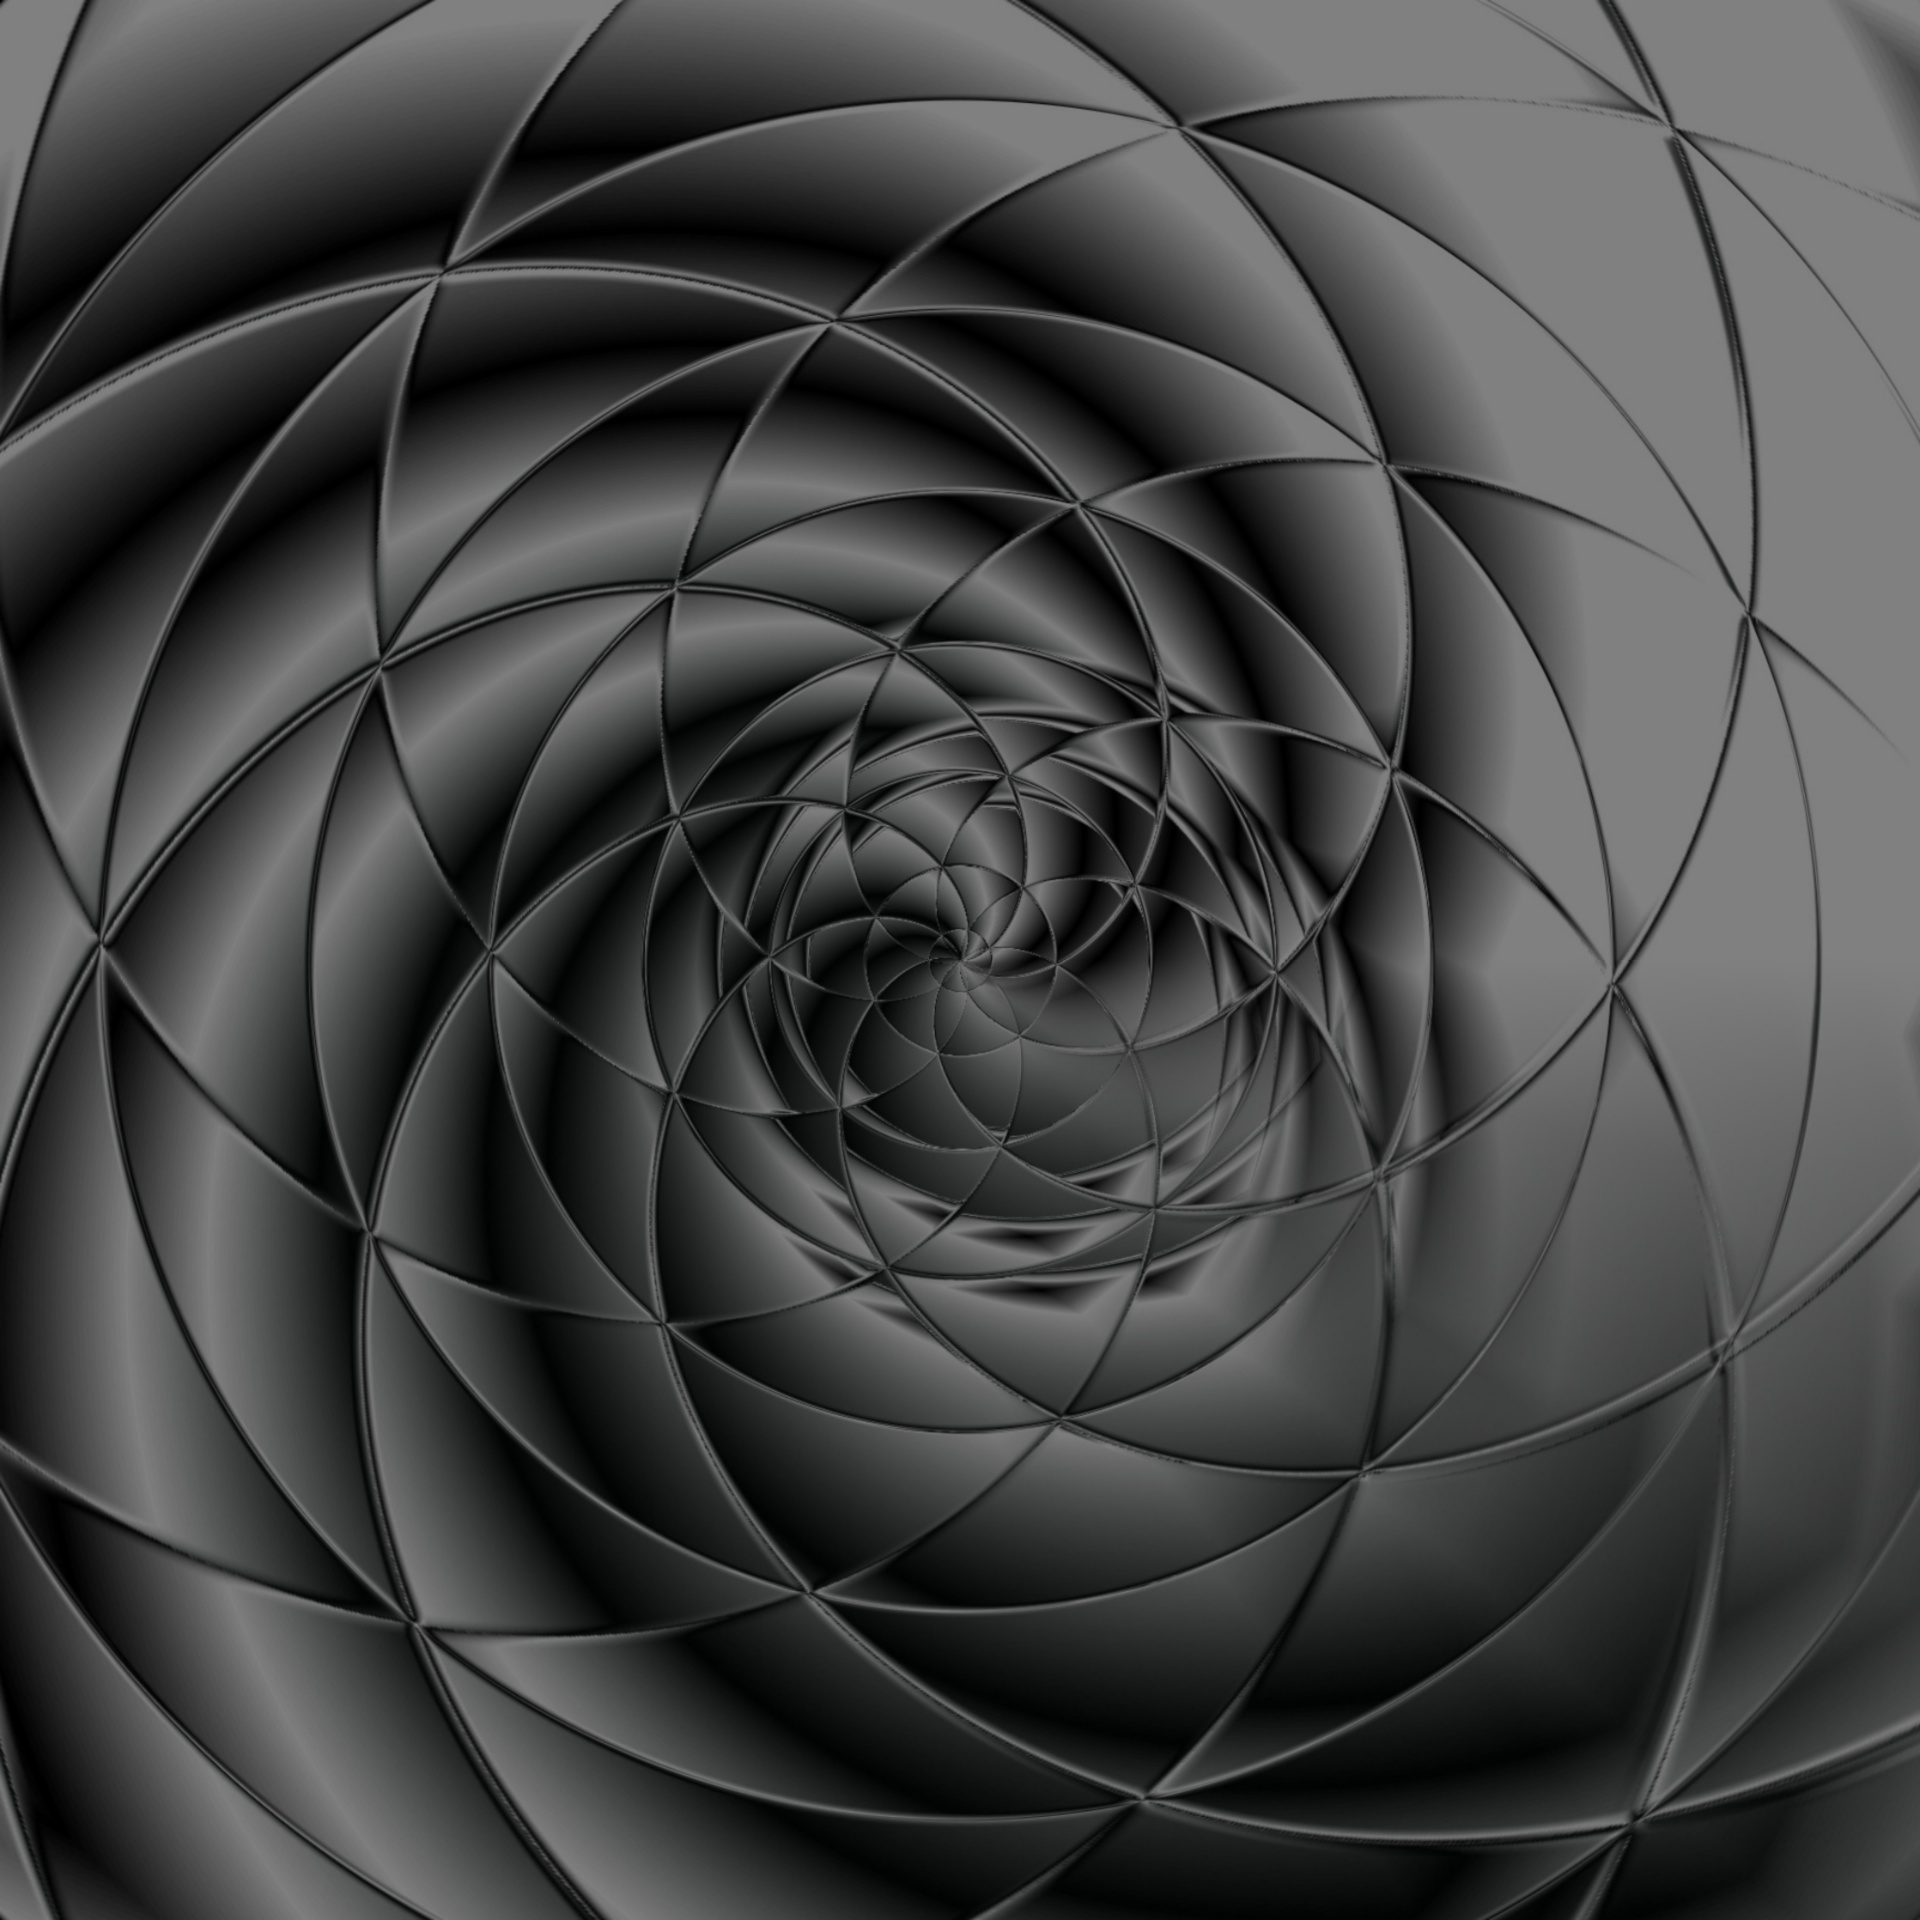 Vortex,free Pictures, Free Photos, Free Images, Royalty - Fractal Art - HD Wallpaper 